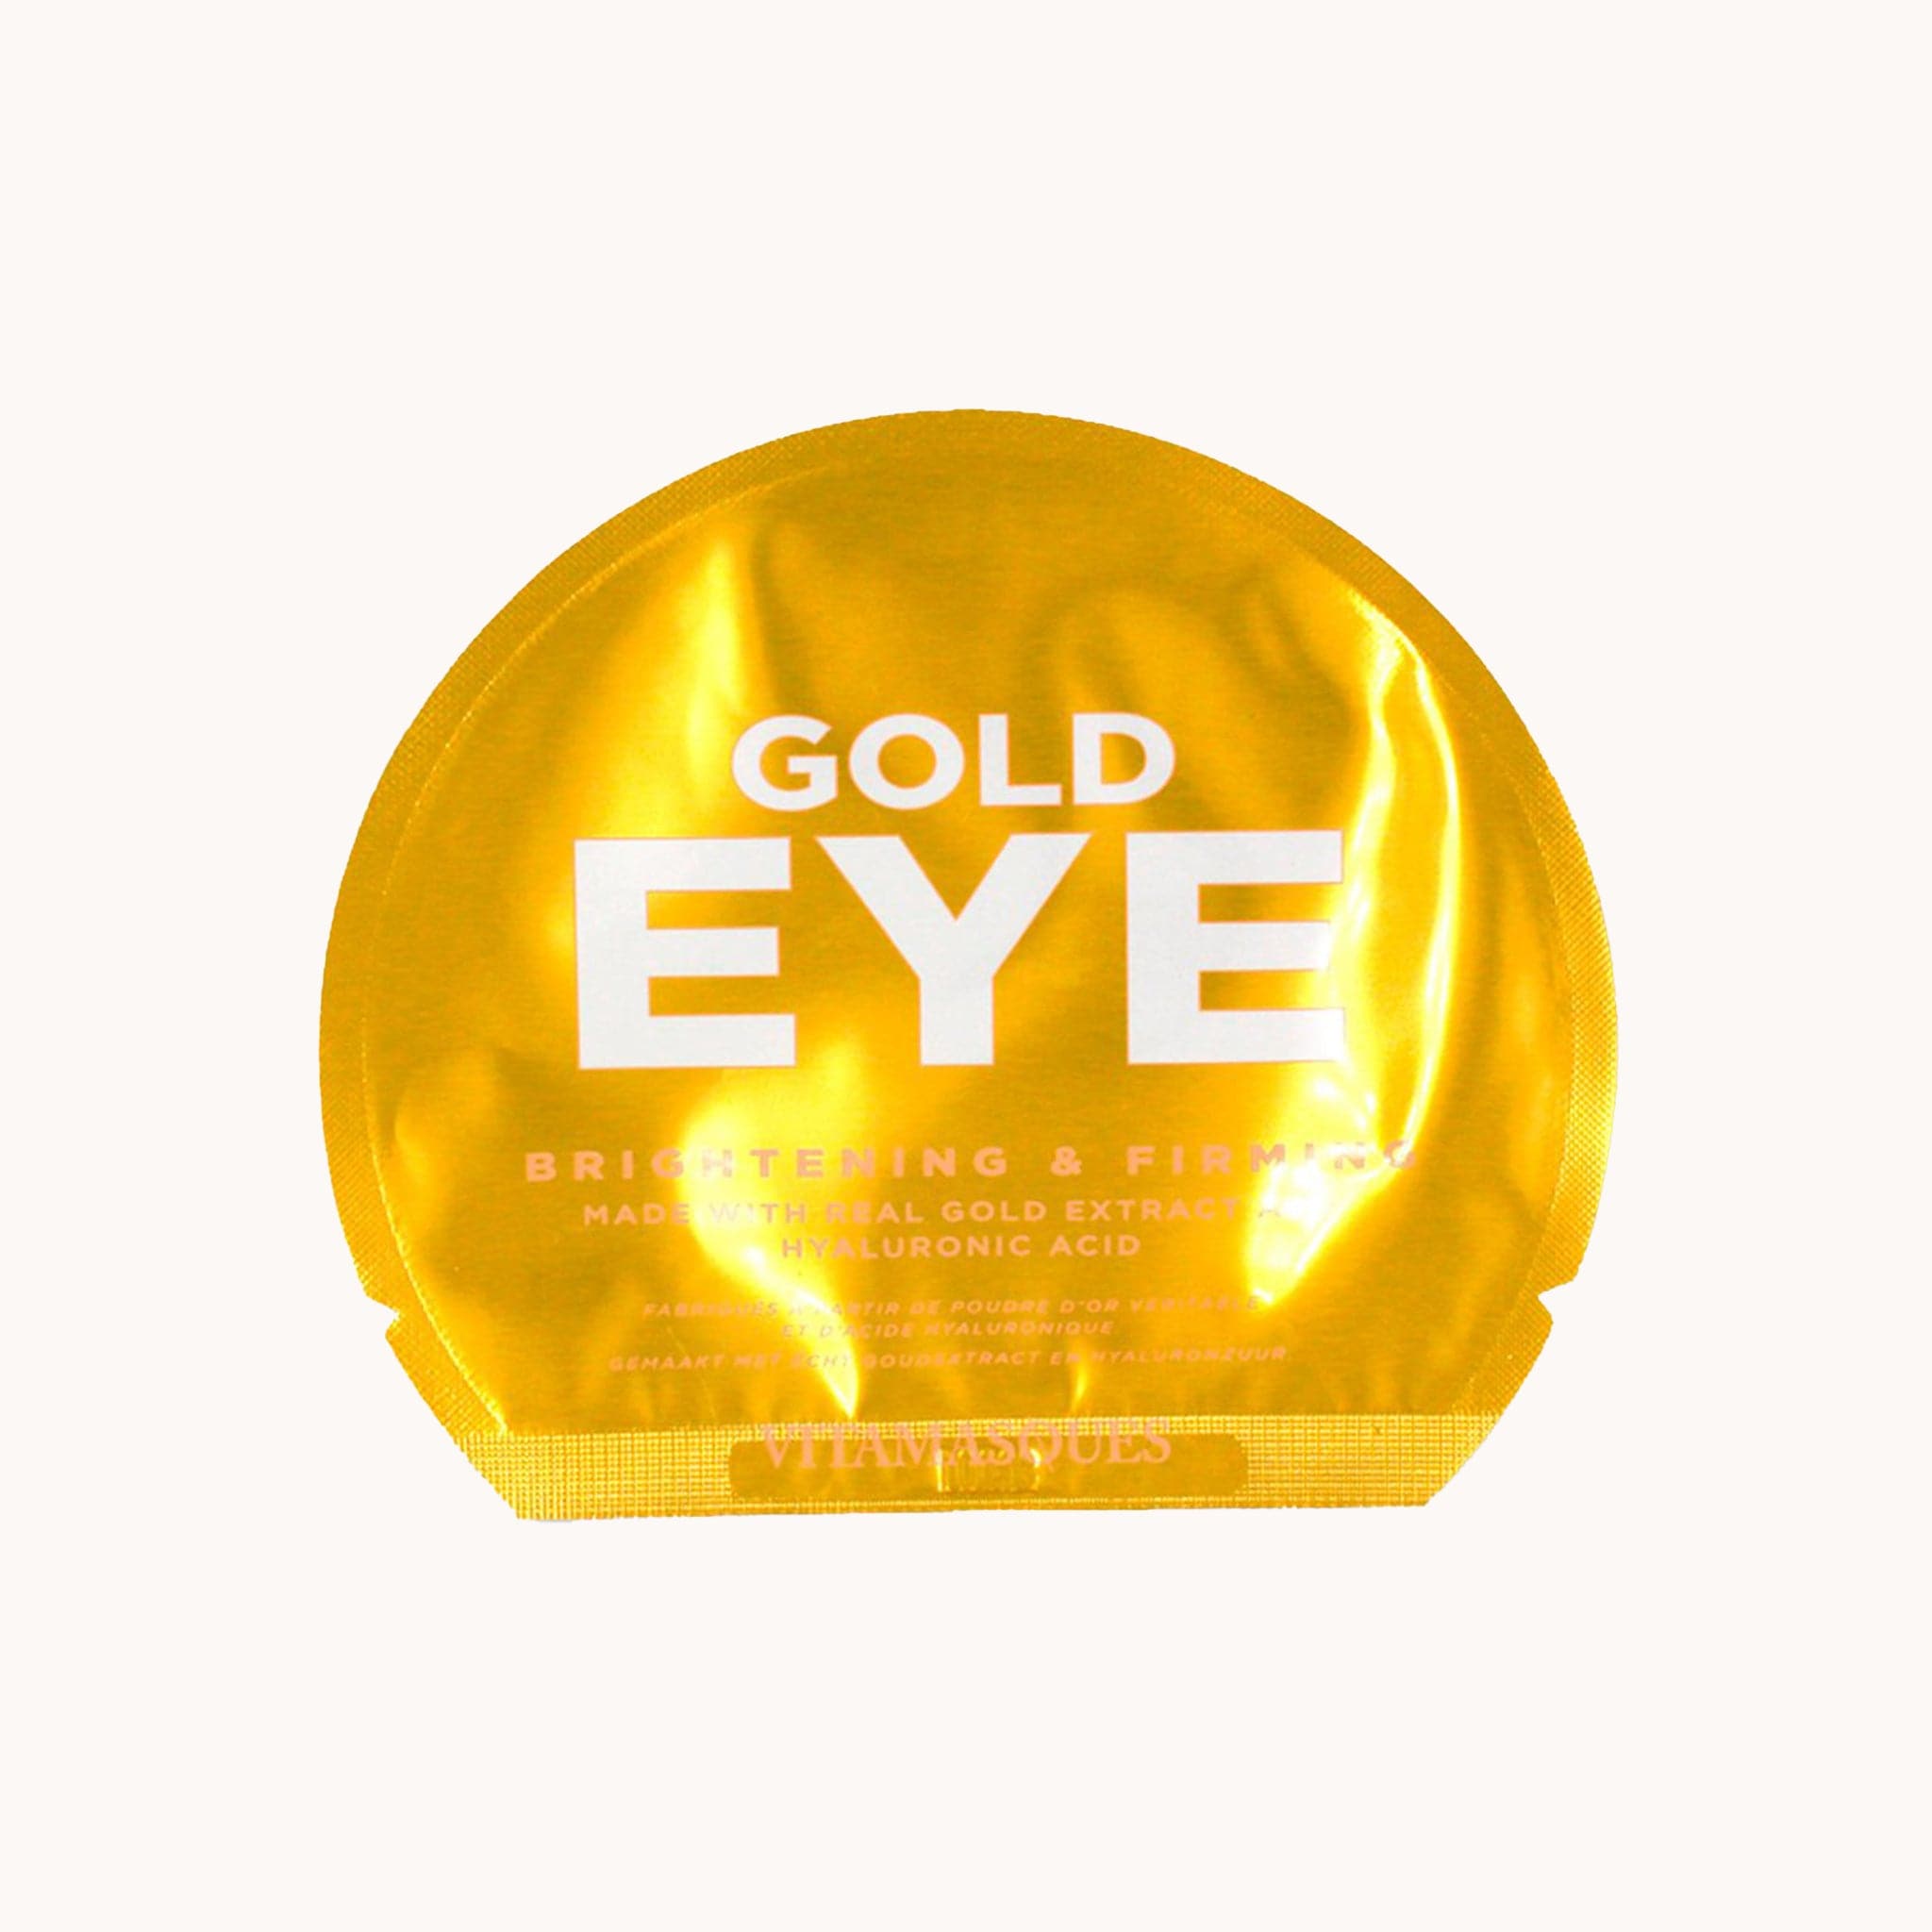 A packet of eye patches in a bright gold arched packaging with white text on the front that reads, "Gold Eye Brightening & Firming".